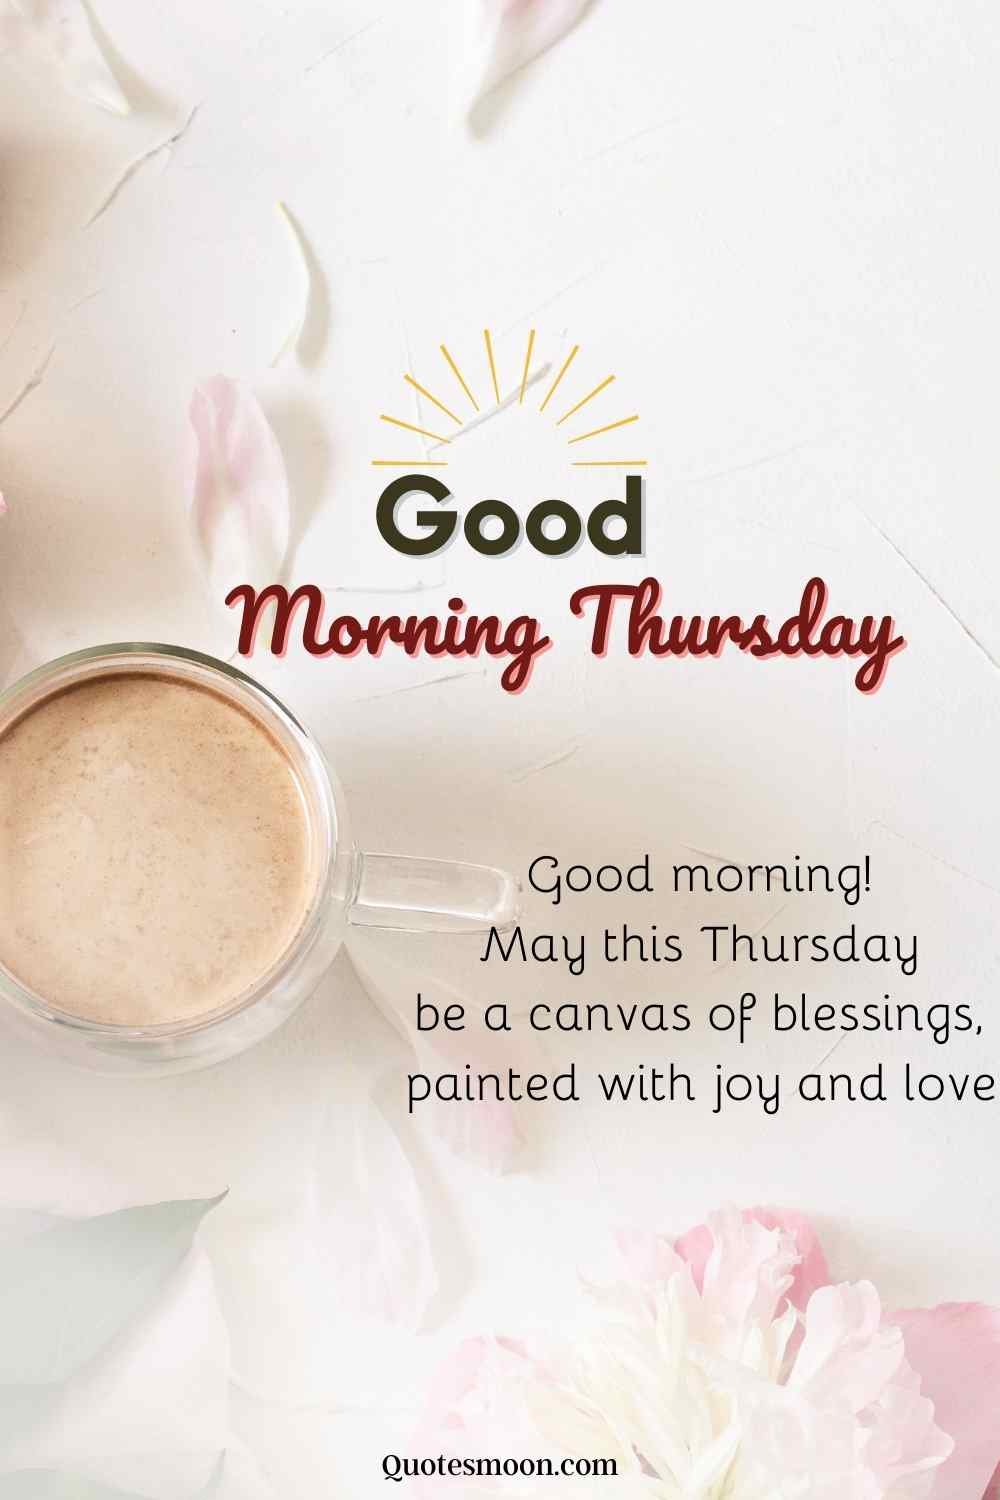 thursday beautiful morning greetings images